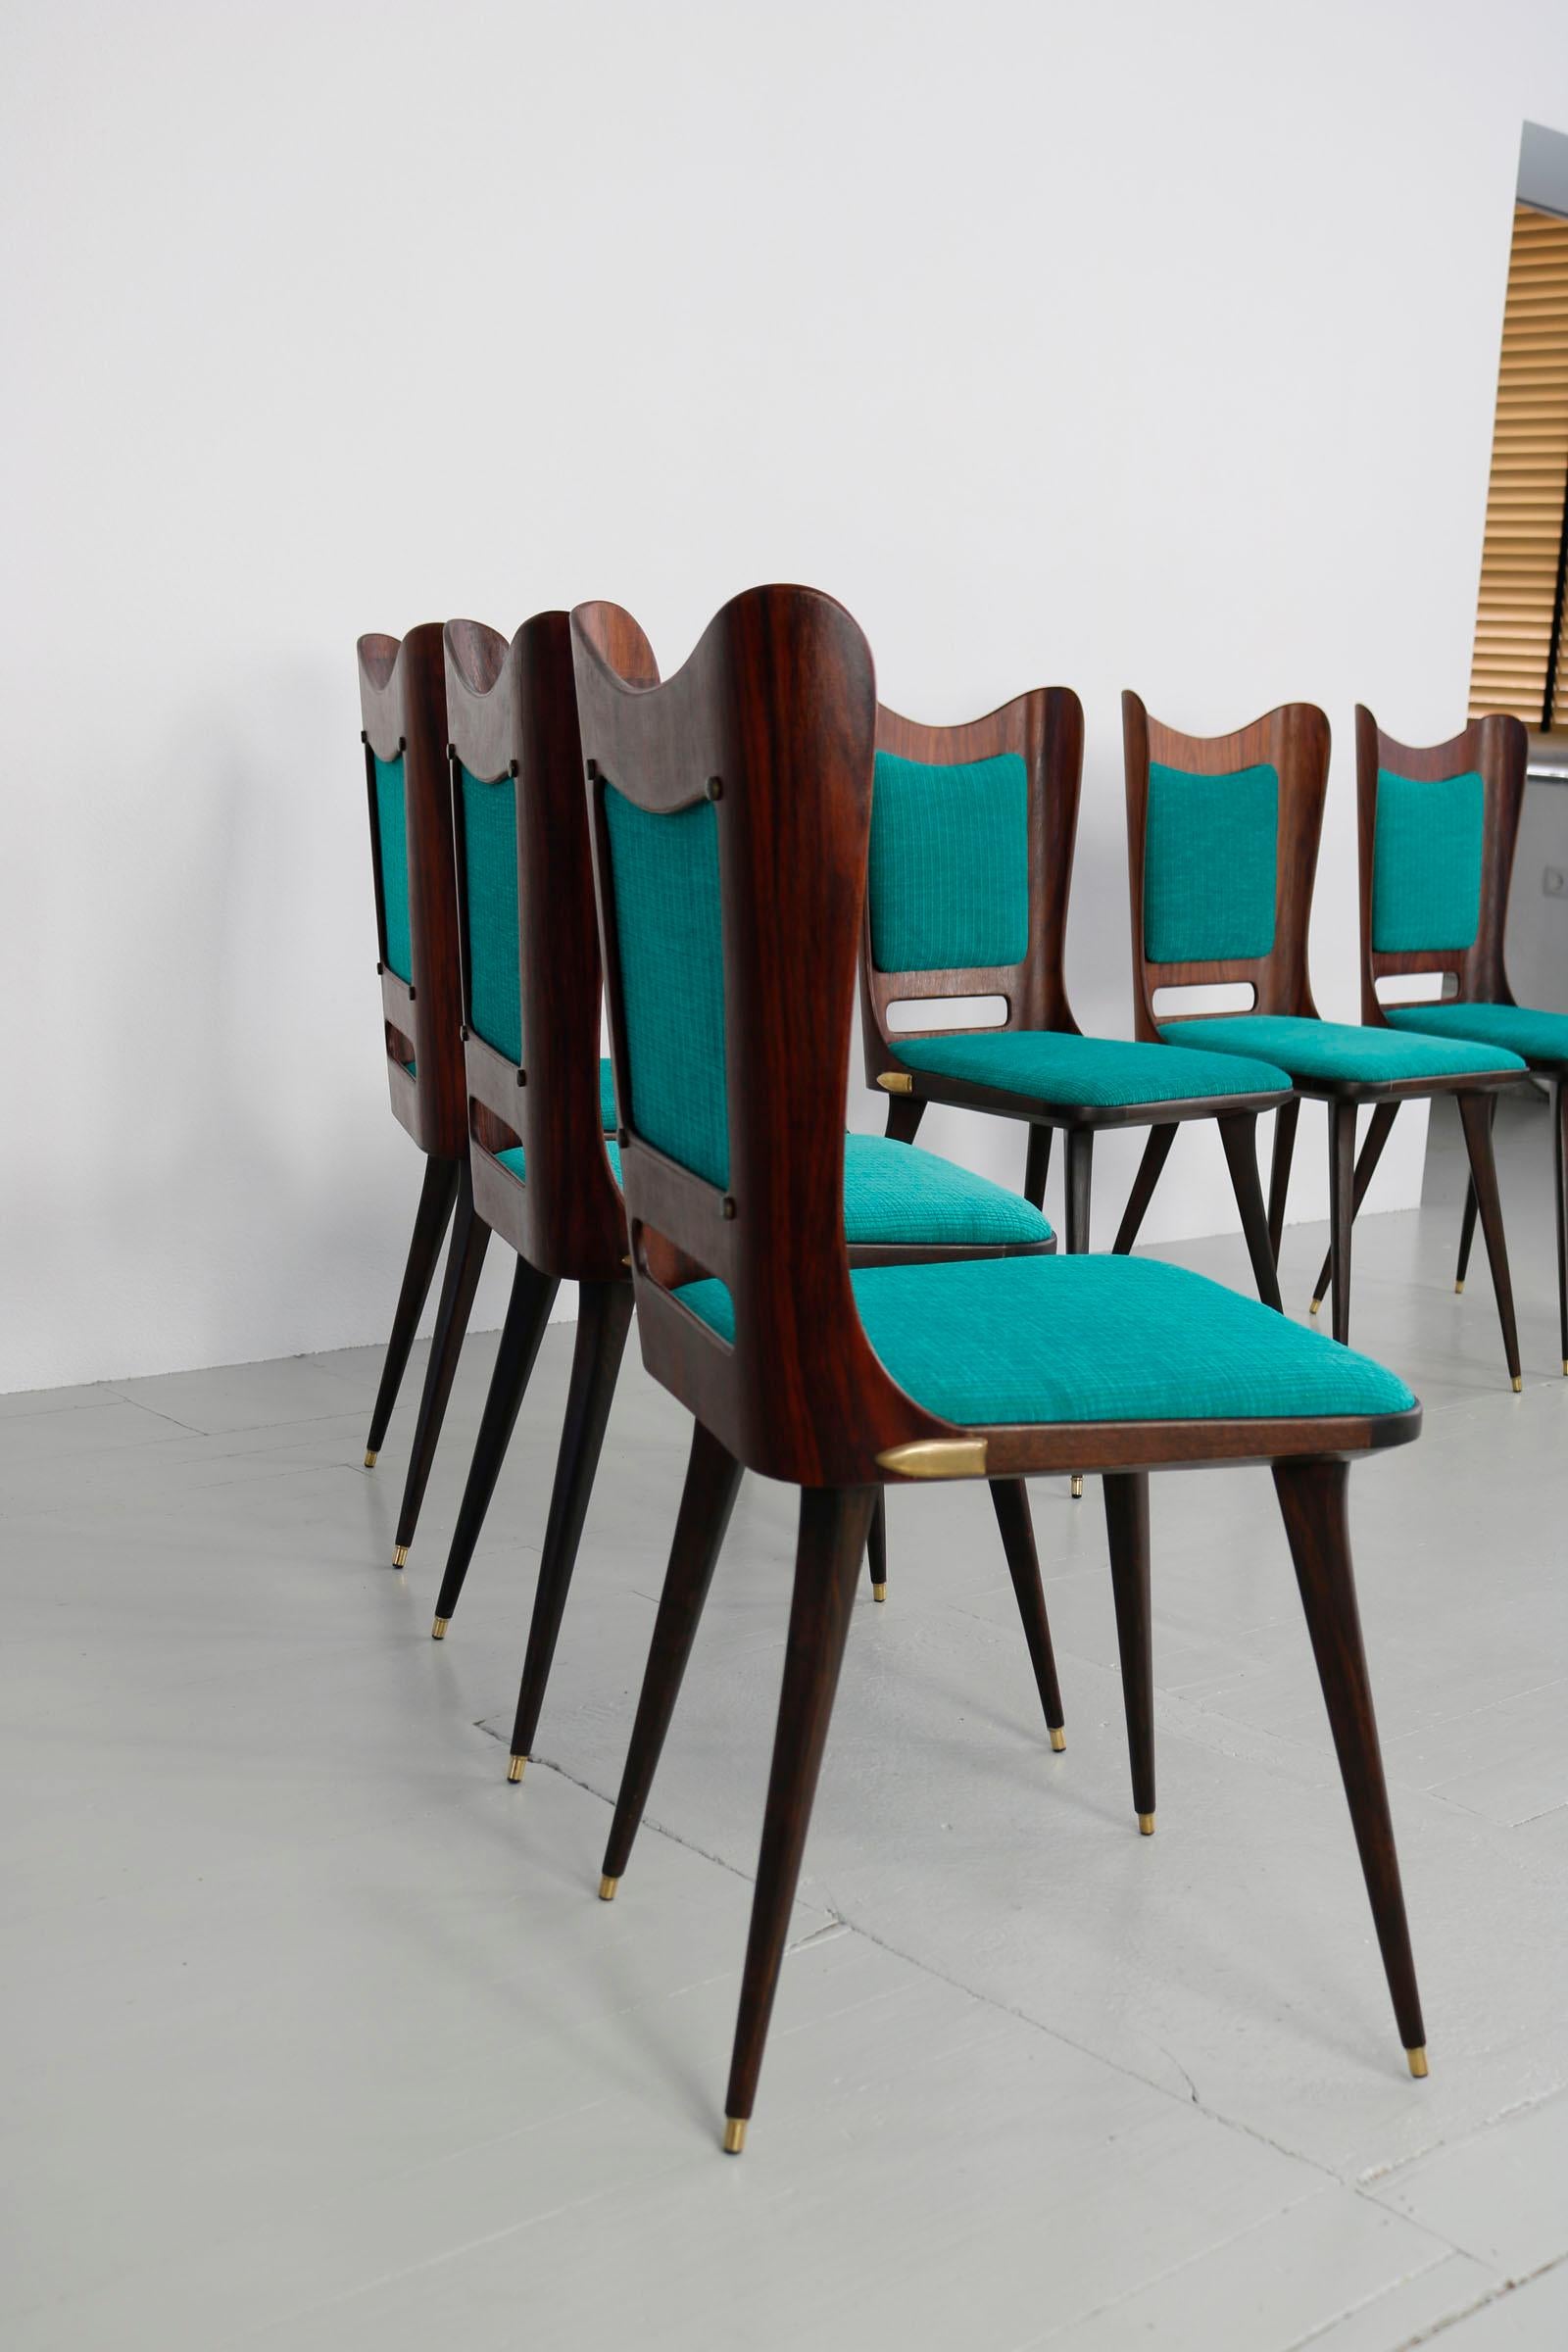 Set of Six Wooden Dining Chairs with Green Upholstery, 1950s For Sale 10